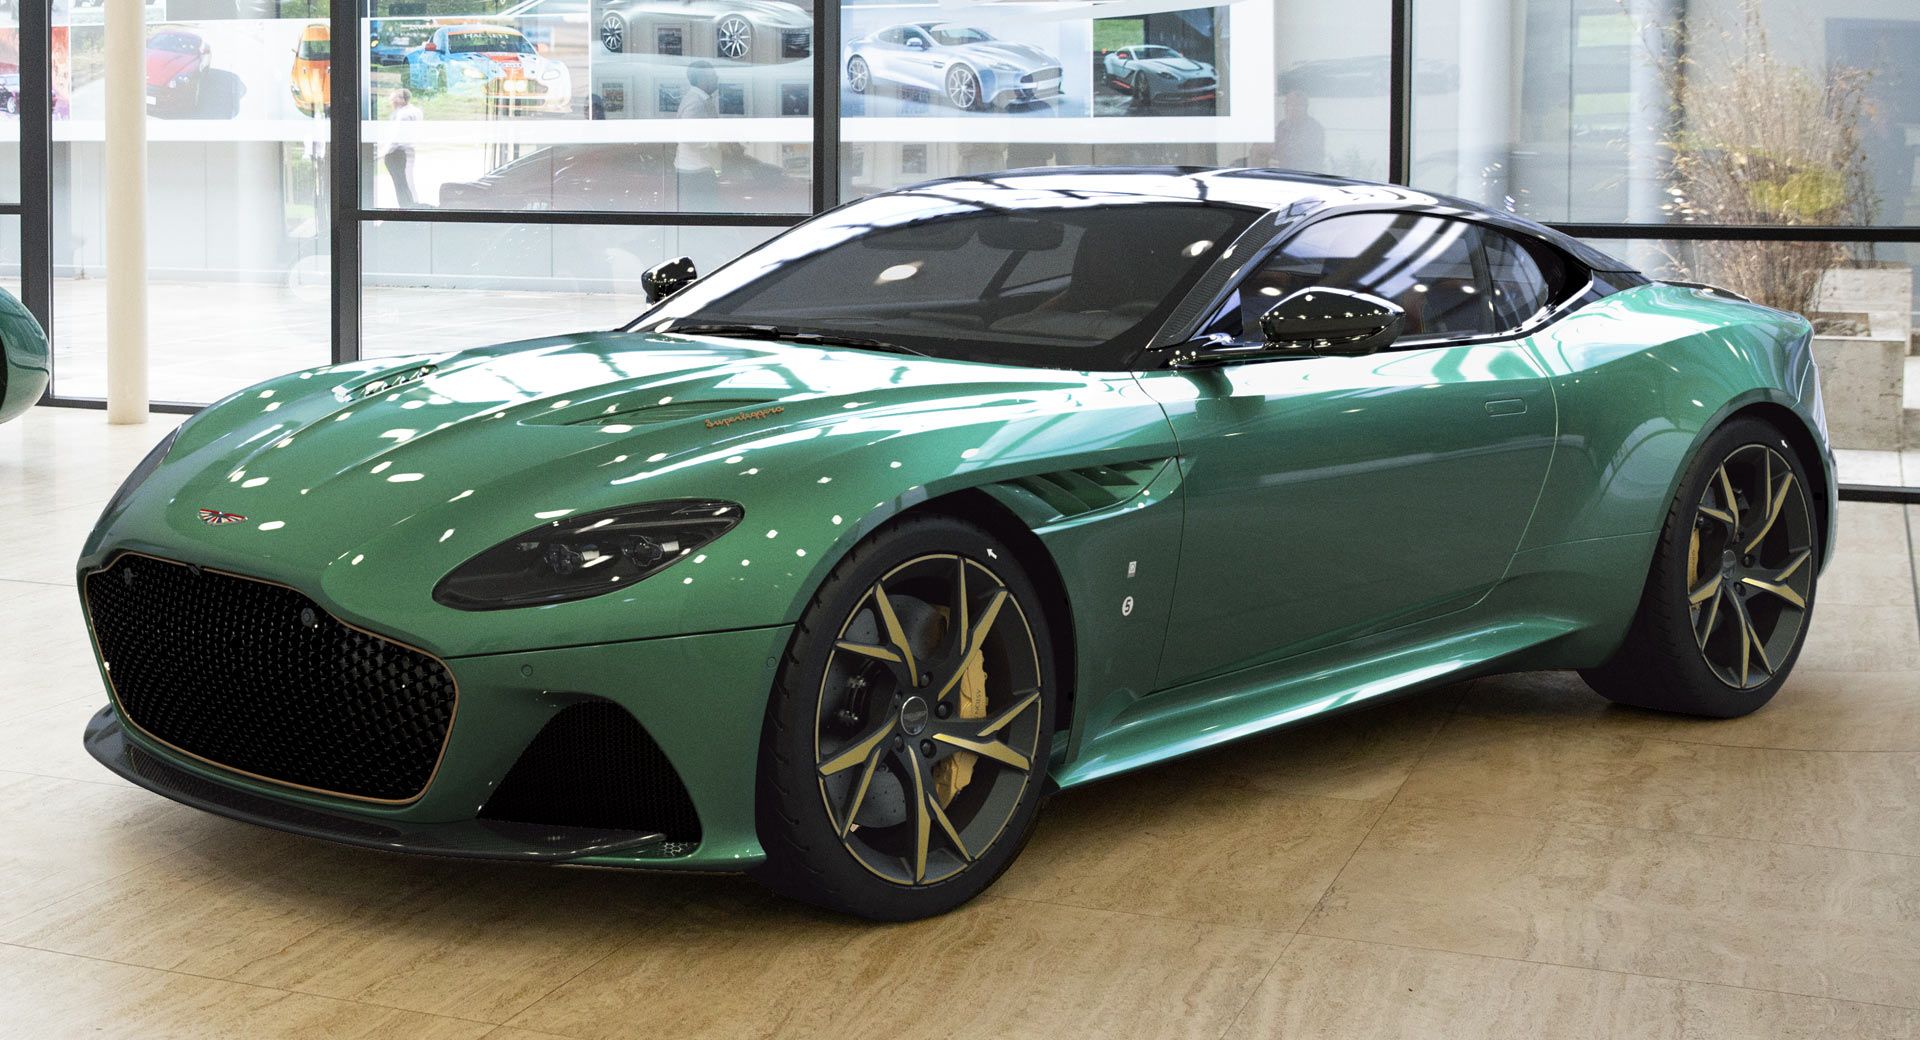 Aston Martin DBS 59 Is A Retro-Inspired Special Edition That Pays Tribute To The DBR1 | Carscoops